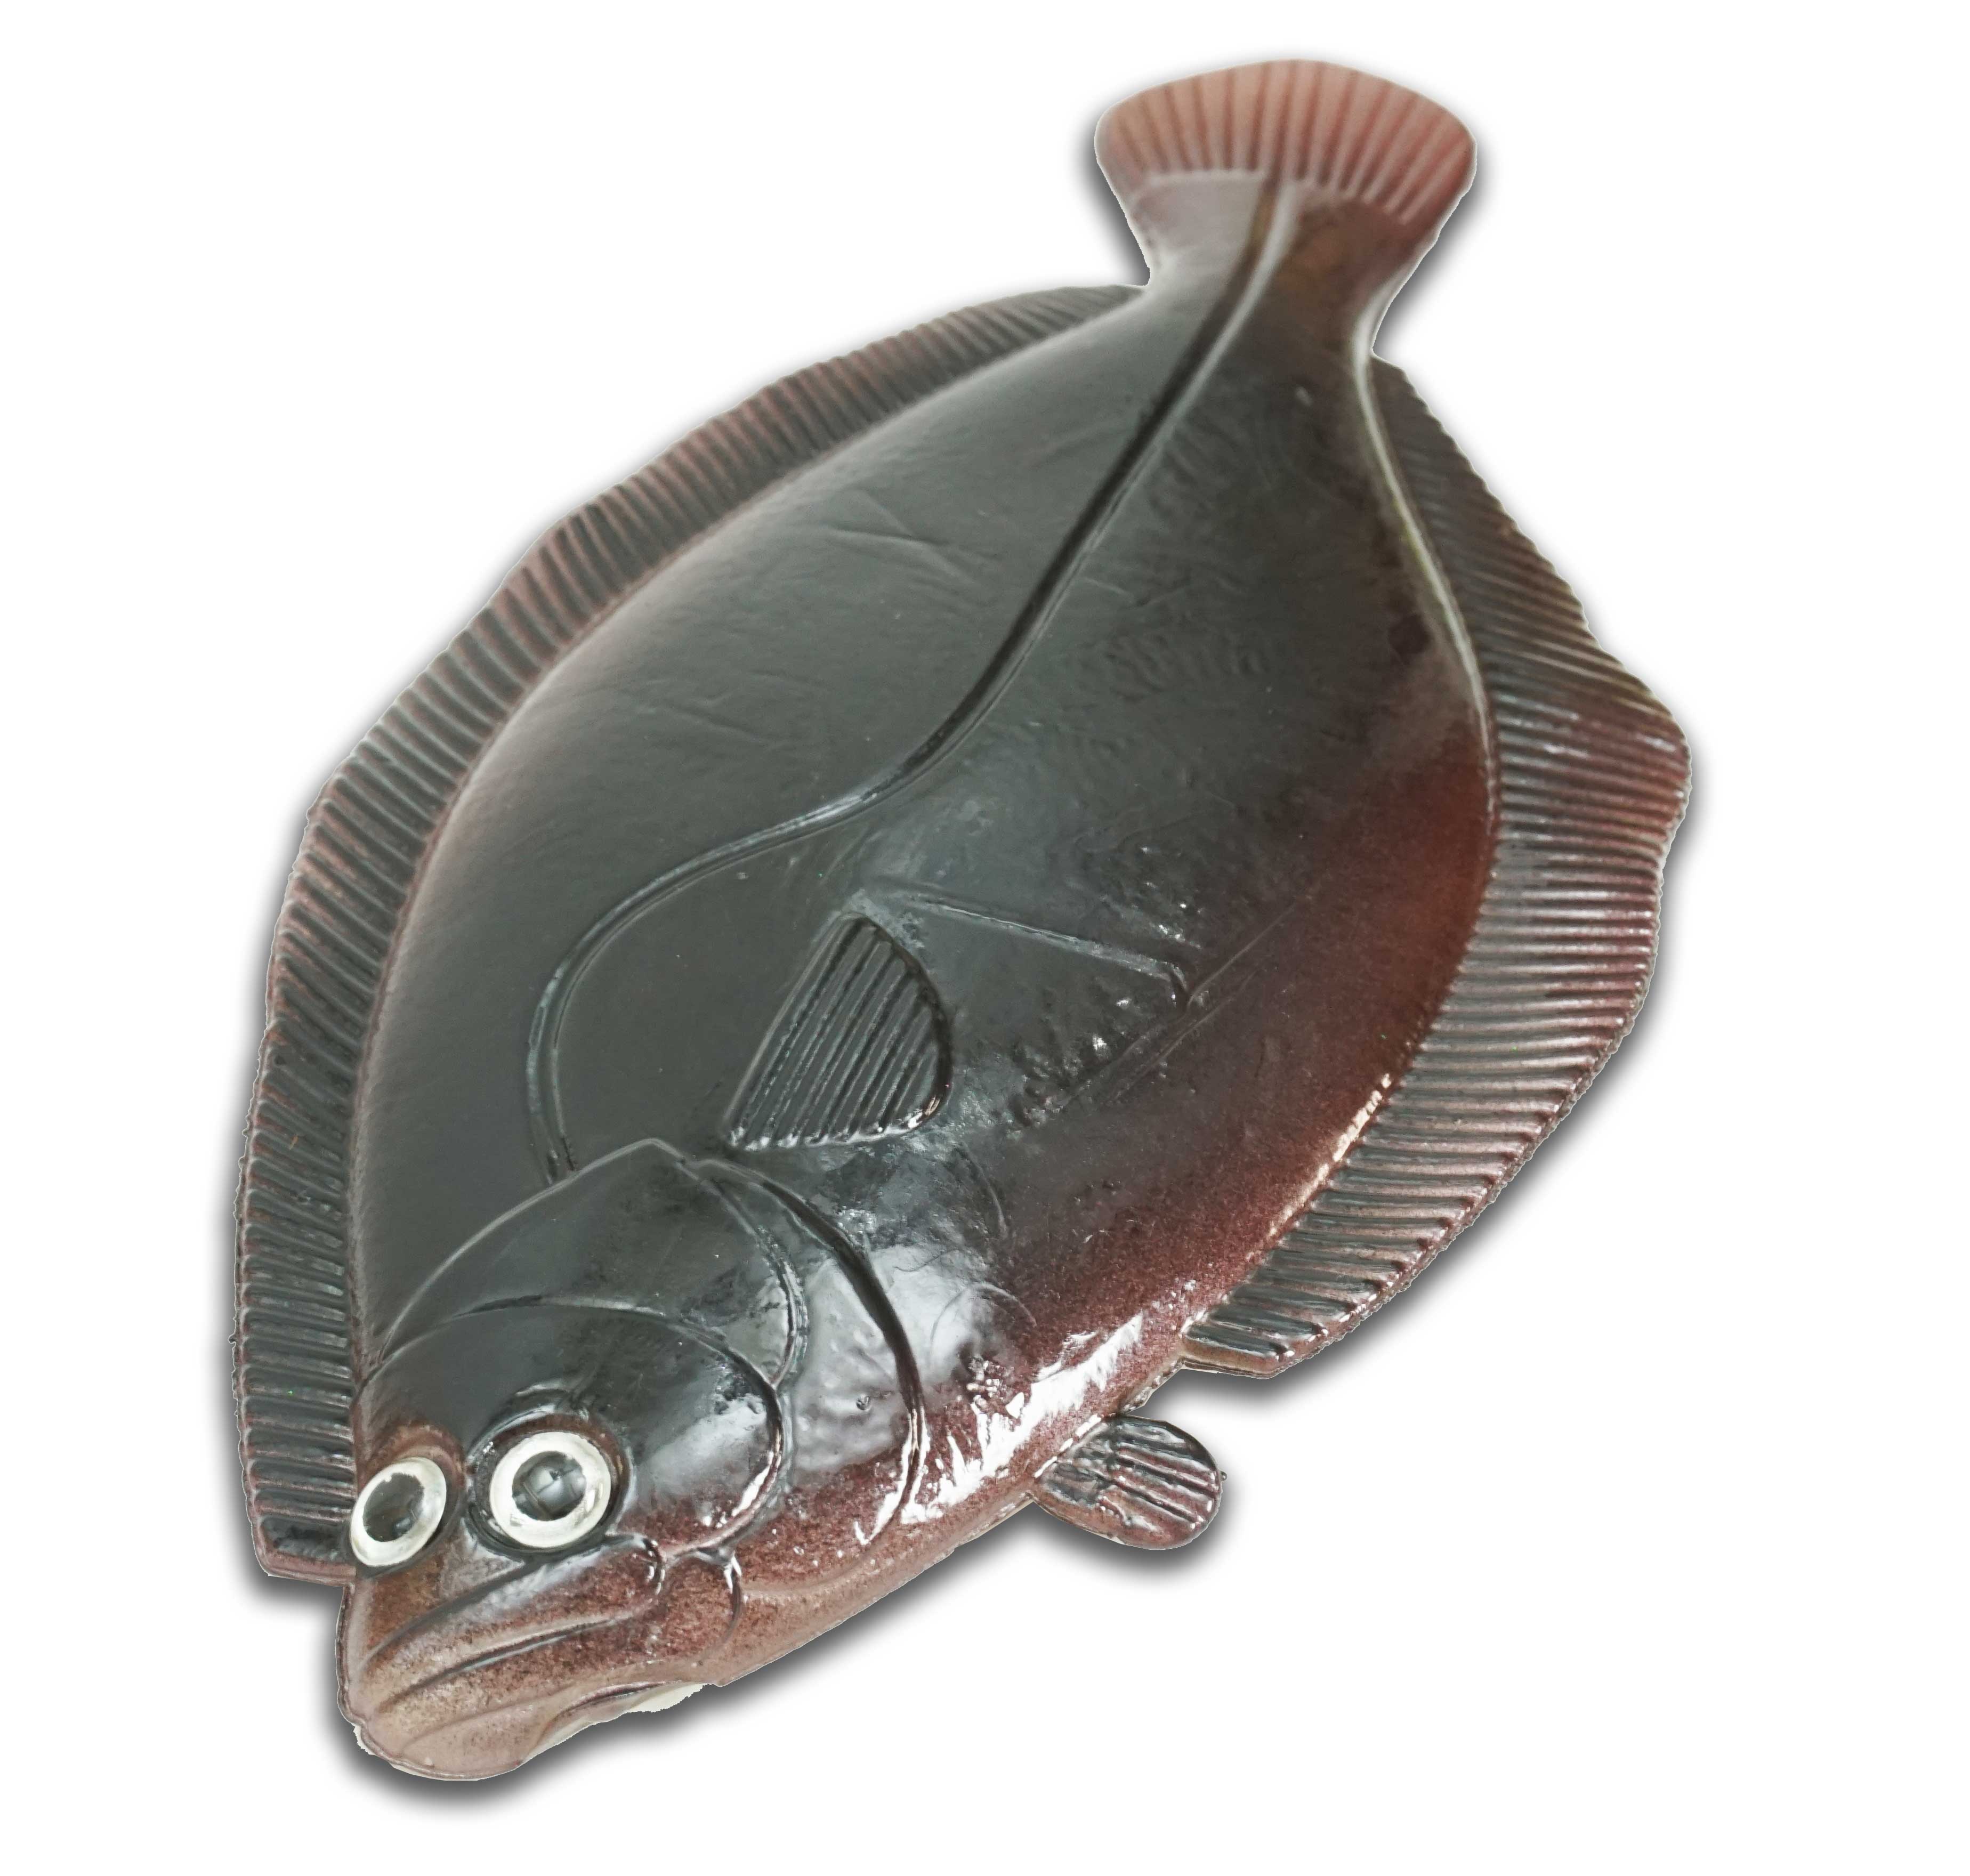 Artificial Flounder 8 Dark Brown - Almost Alive Lures Artificial Flounder  8 Dark Brown AAFL800-1 $5.99 [AAFL800-1] - $5.99 : Almost Alive Lures, The